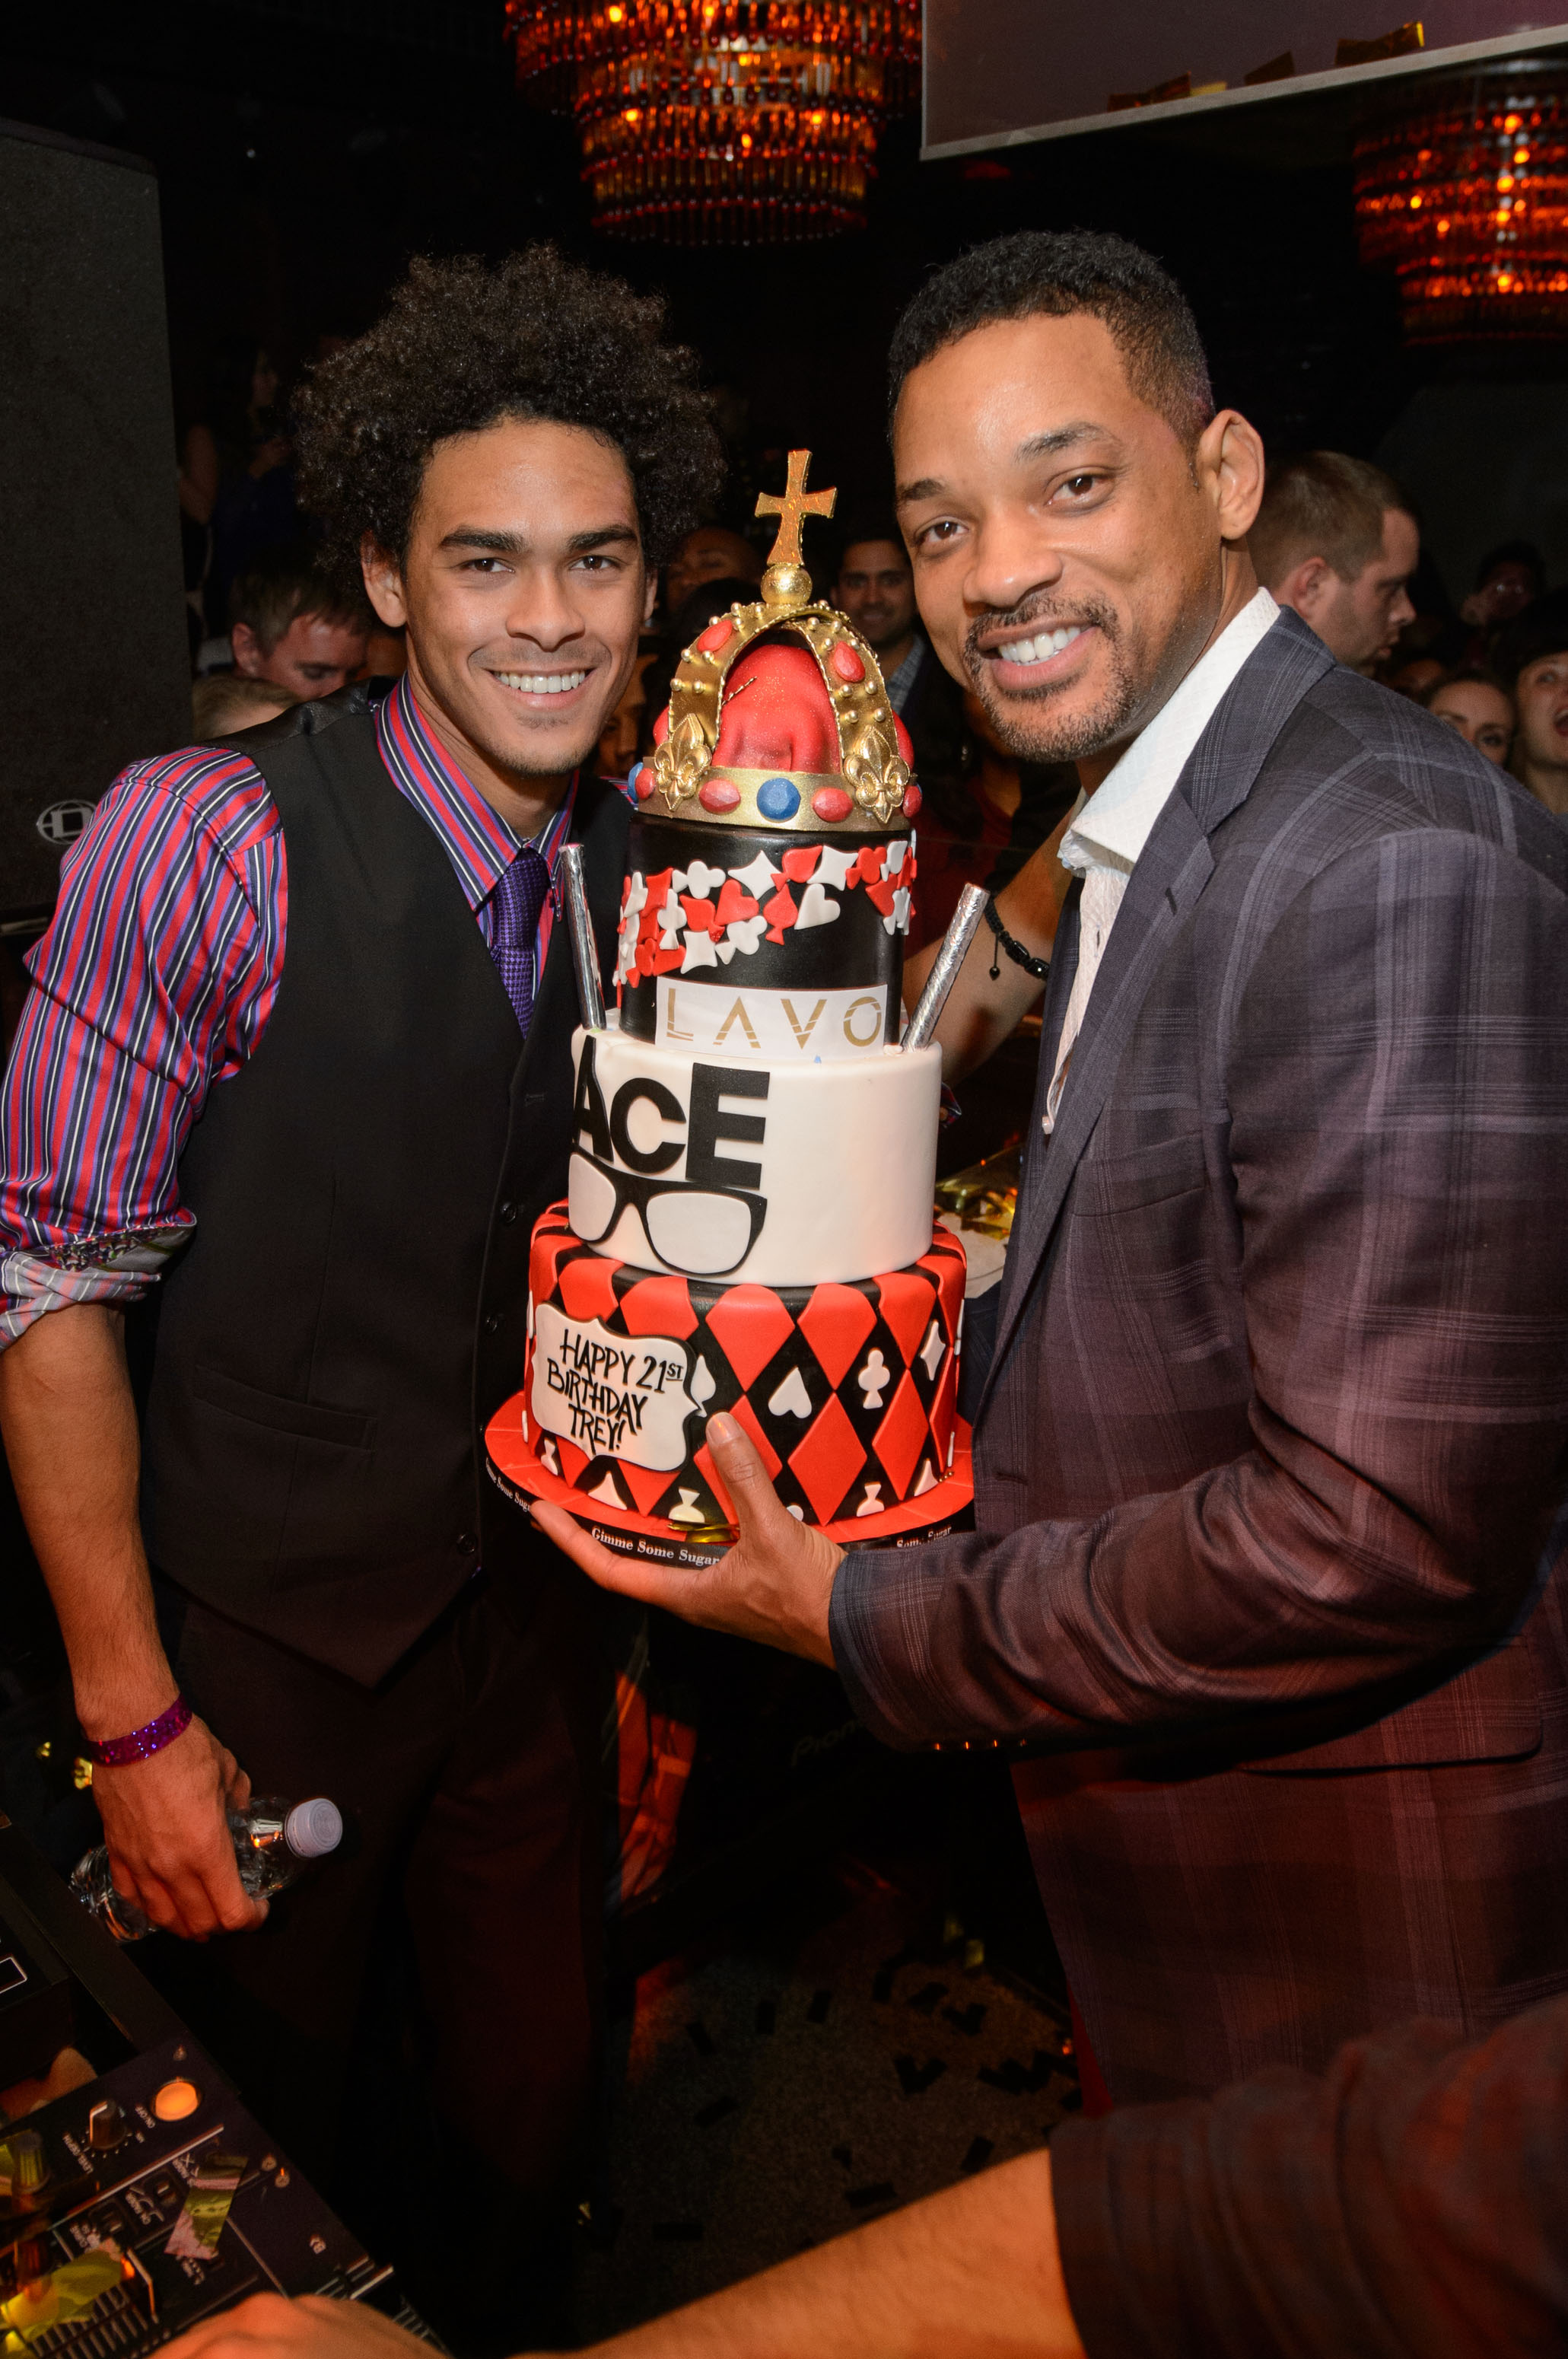 DJ Ace (Trey Smith) celebrates his 21st Birthday with his father, Will Smith at Lavo Las Vegas, Las Vegas NV, Sunday, November 10, 2013 (Photo by Al Powers/Powers Imagery/Invision/AP)